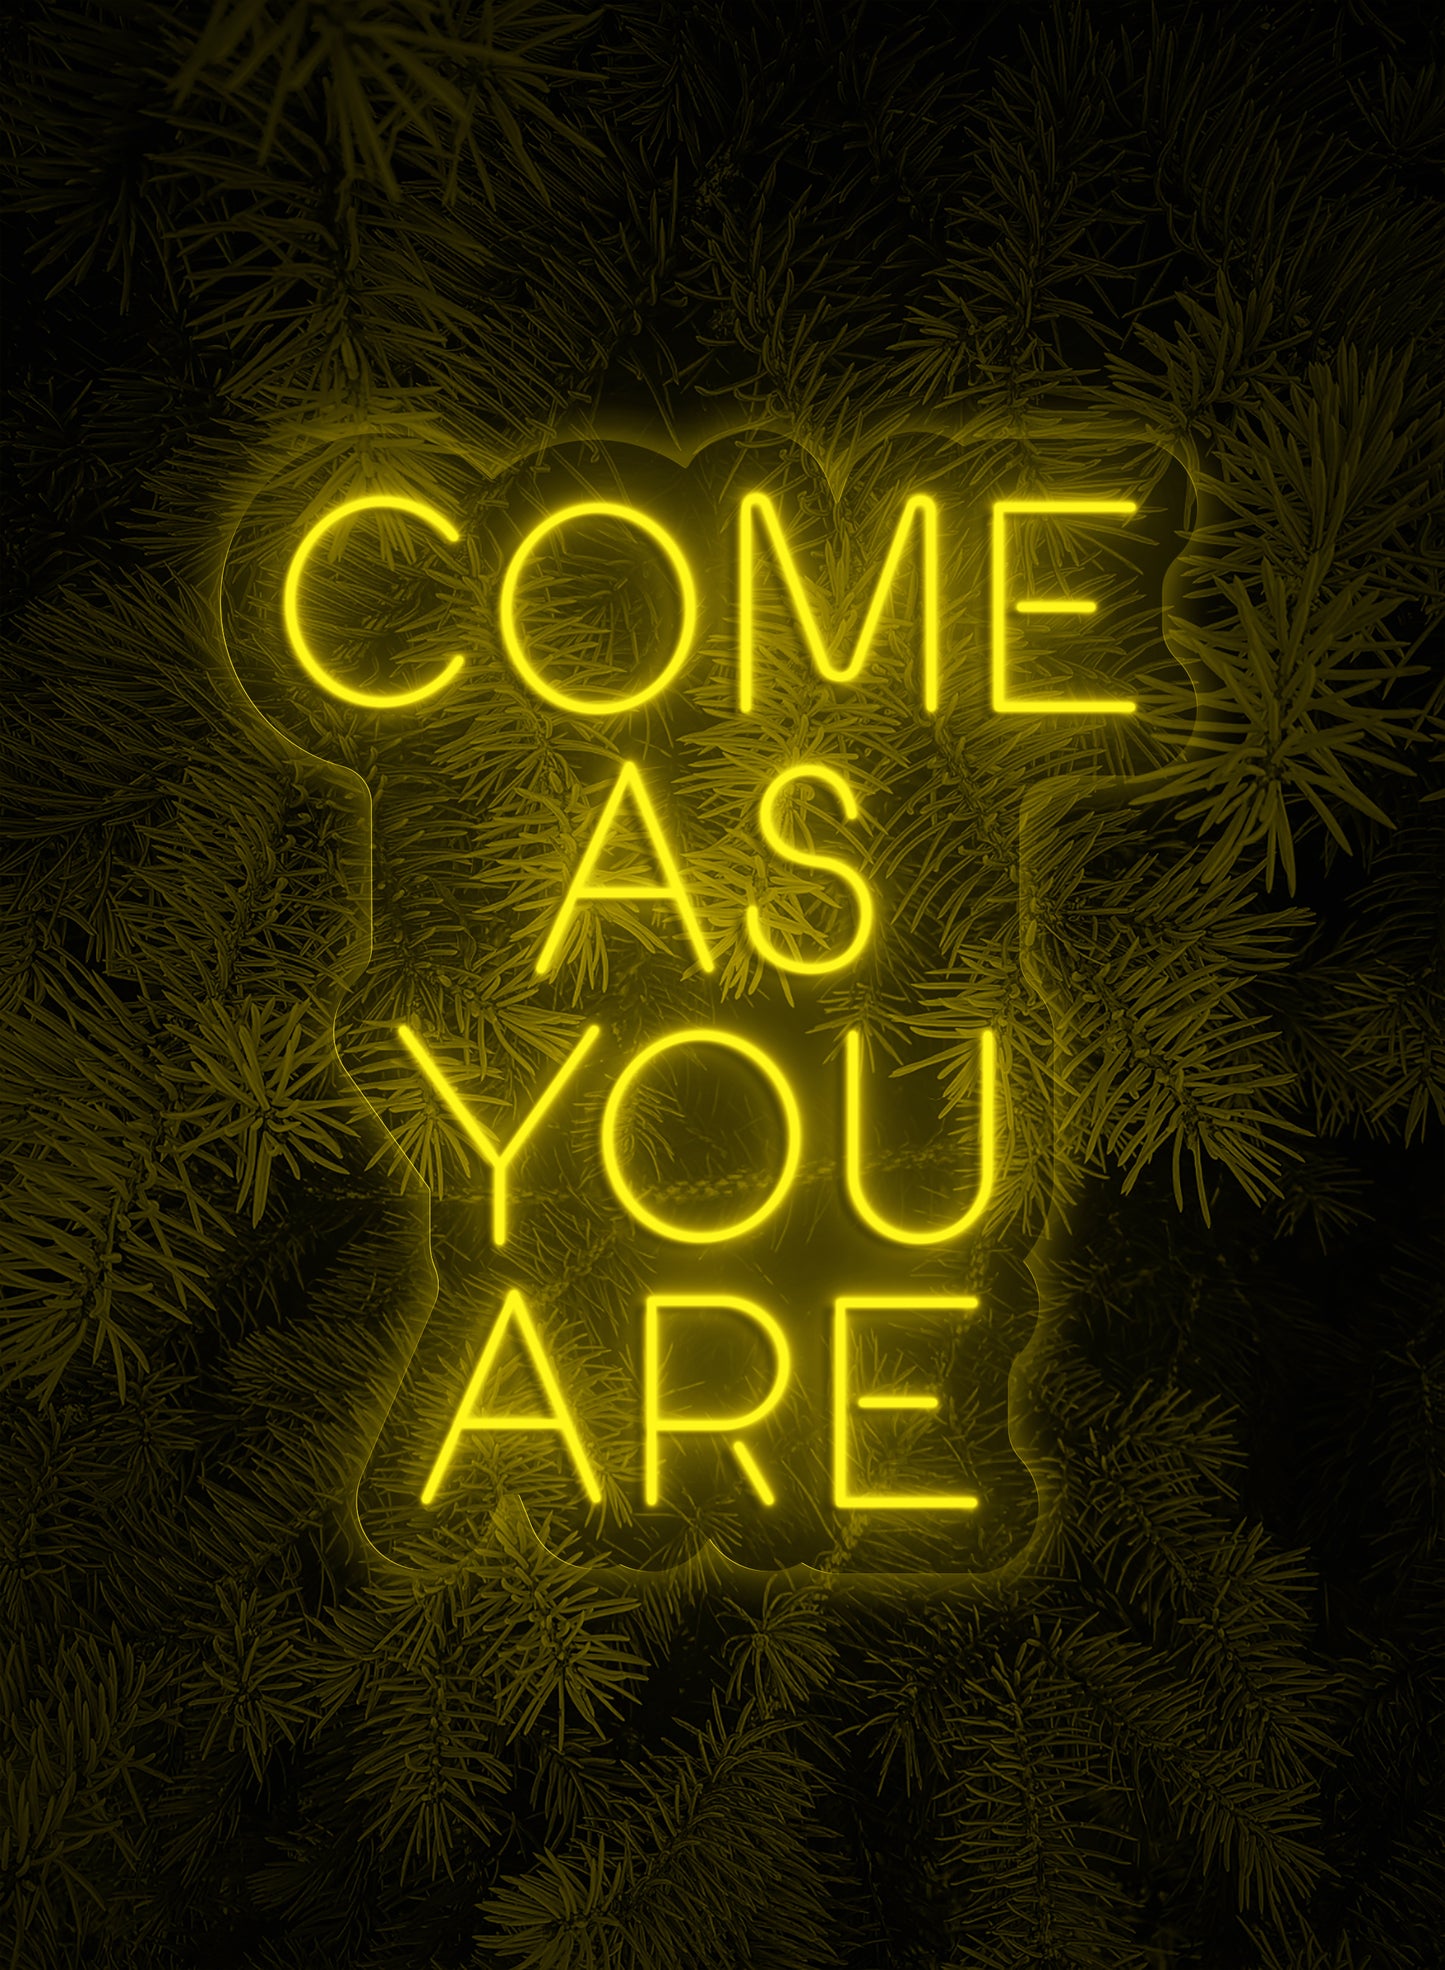 Come as you are